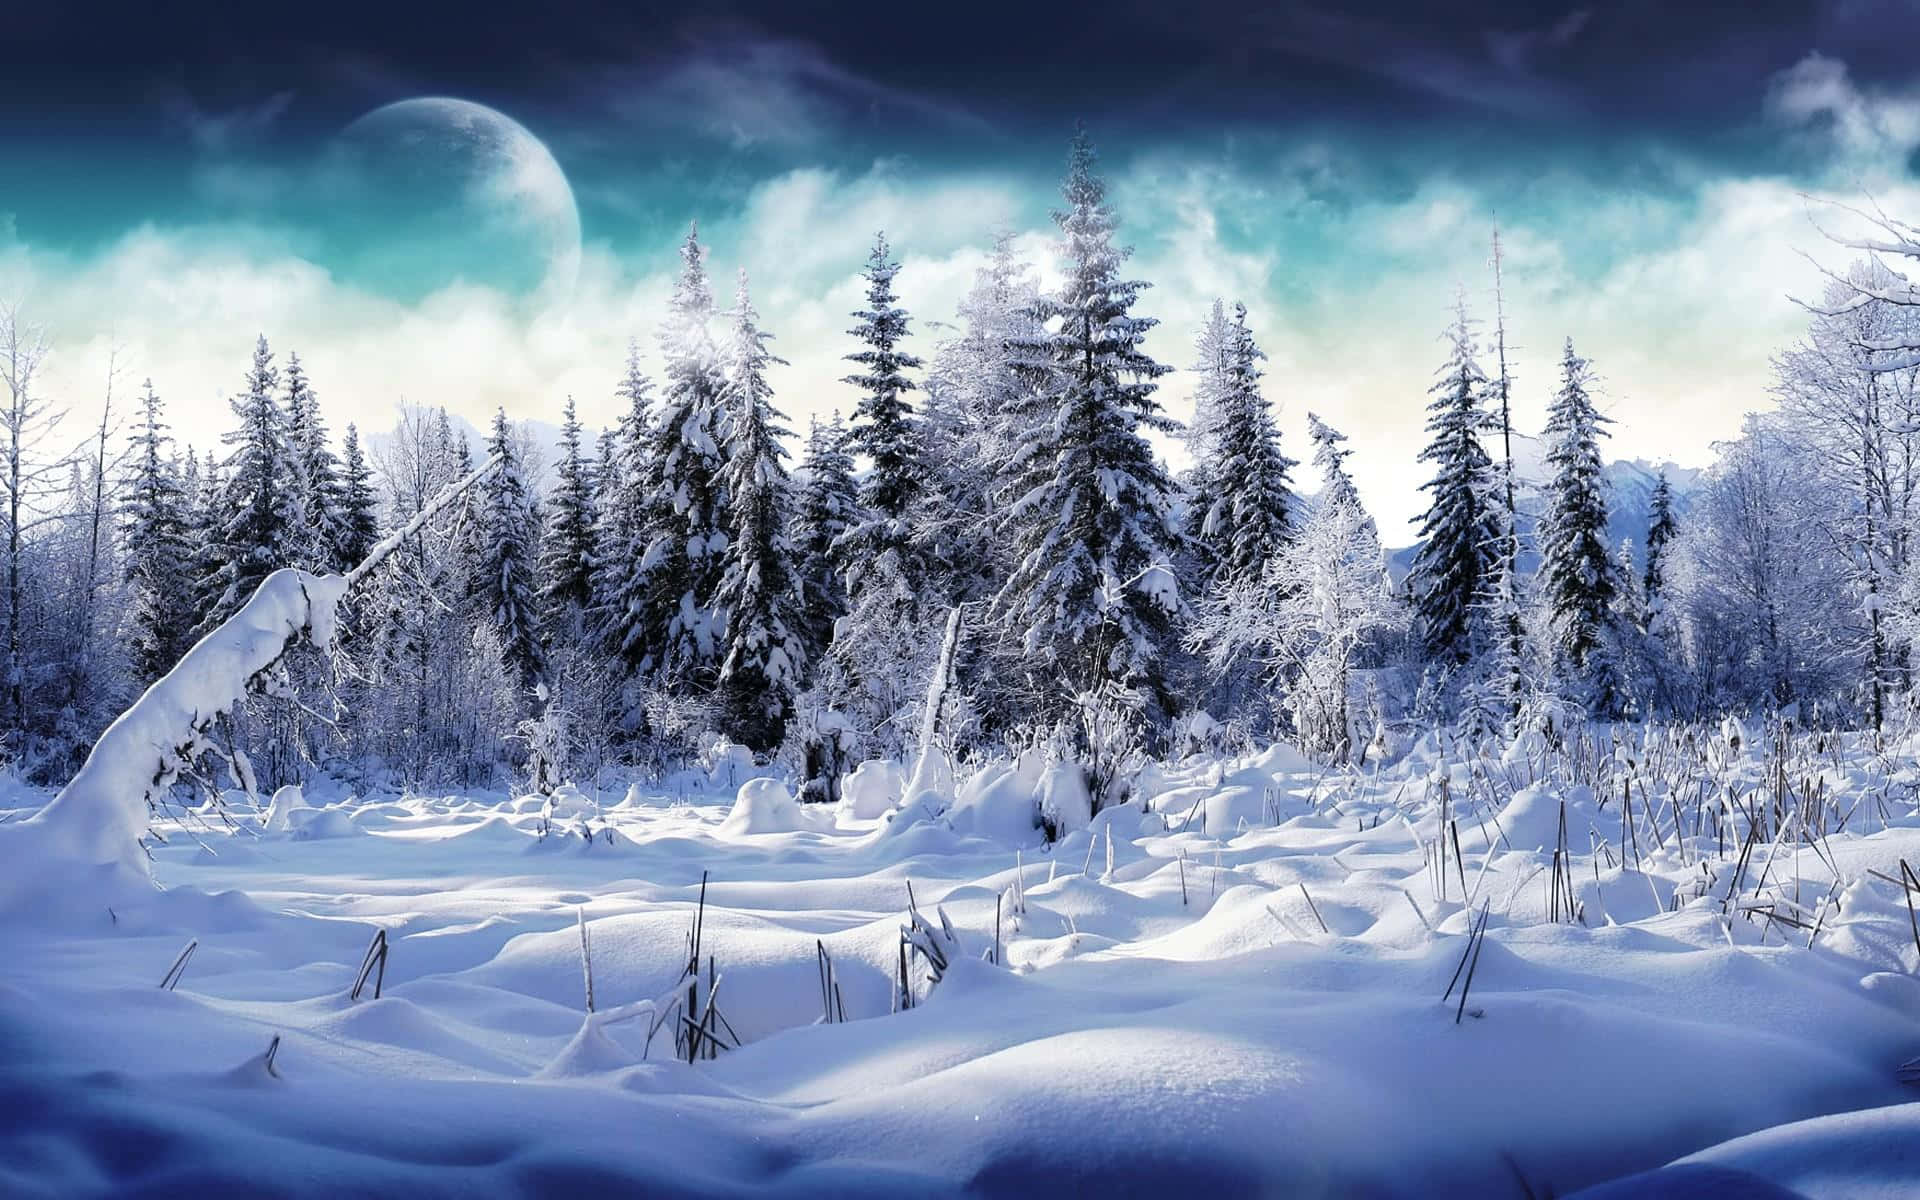 Enjoy the beauty of a winter forest